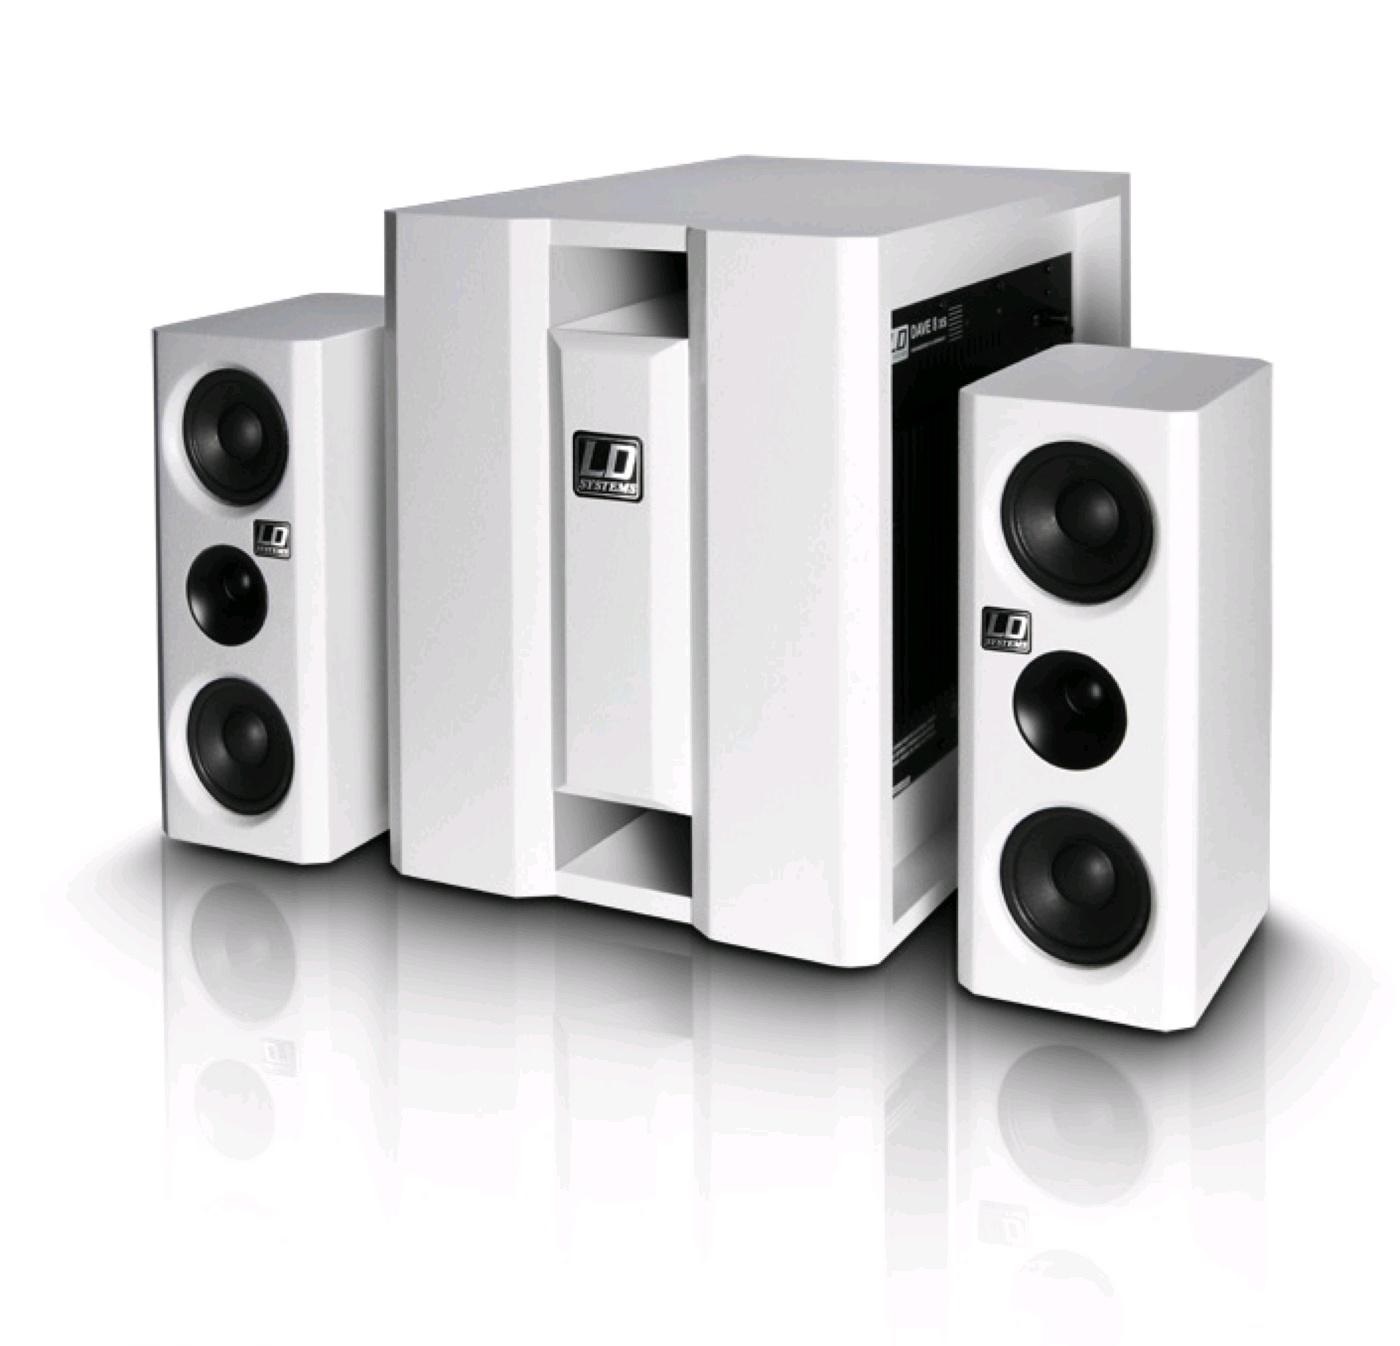 LD systems Dave 8 XSW